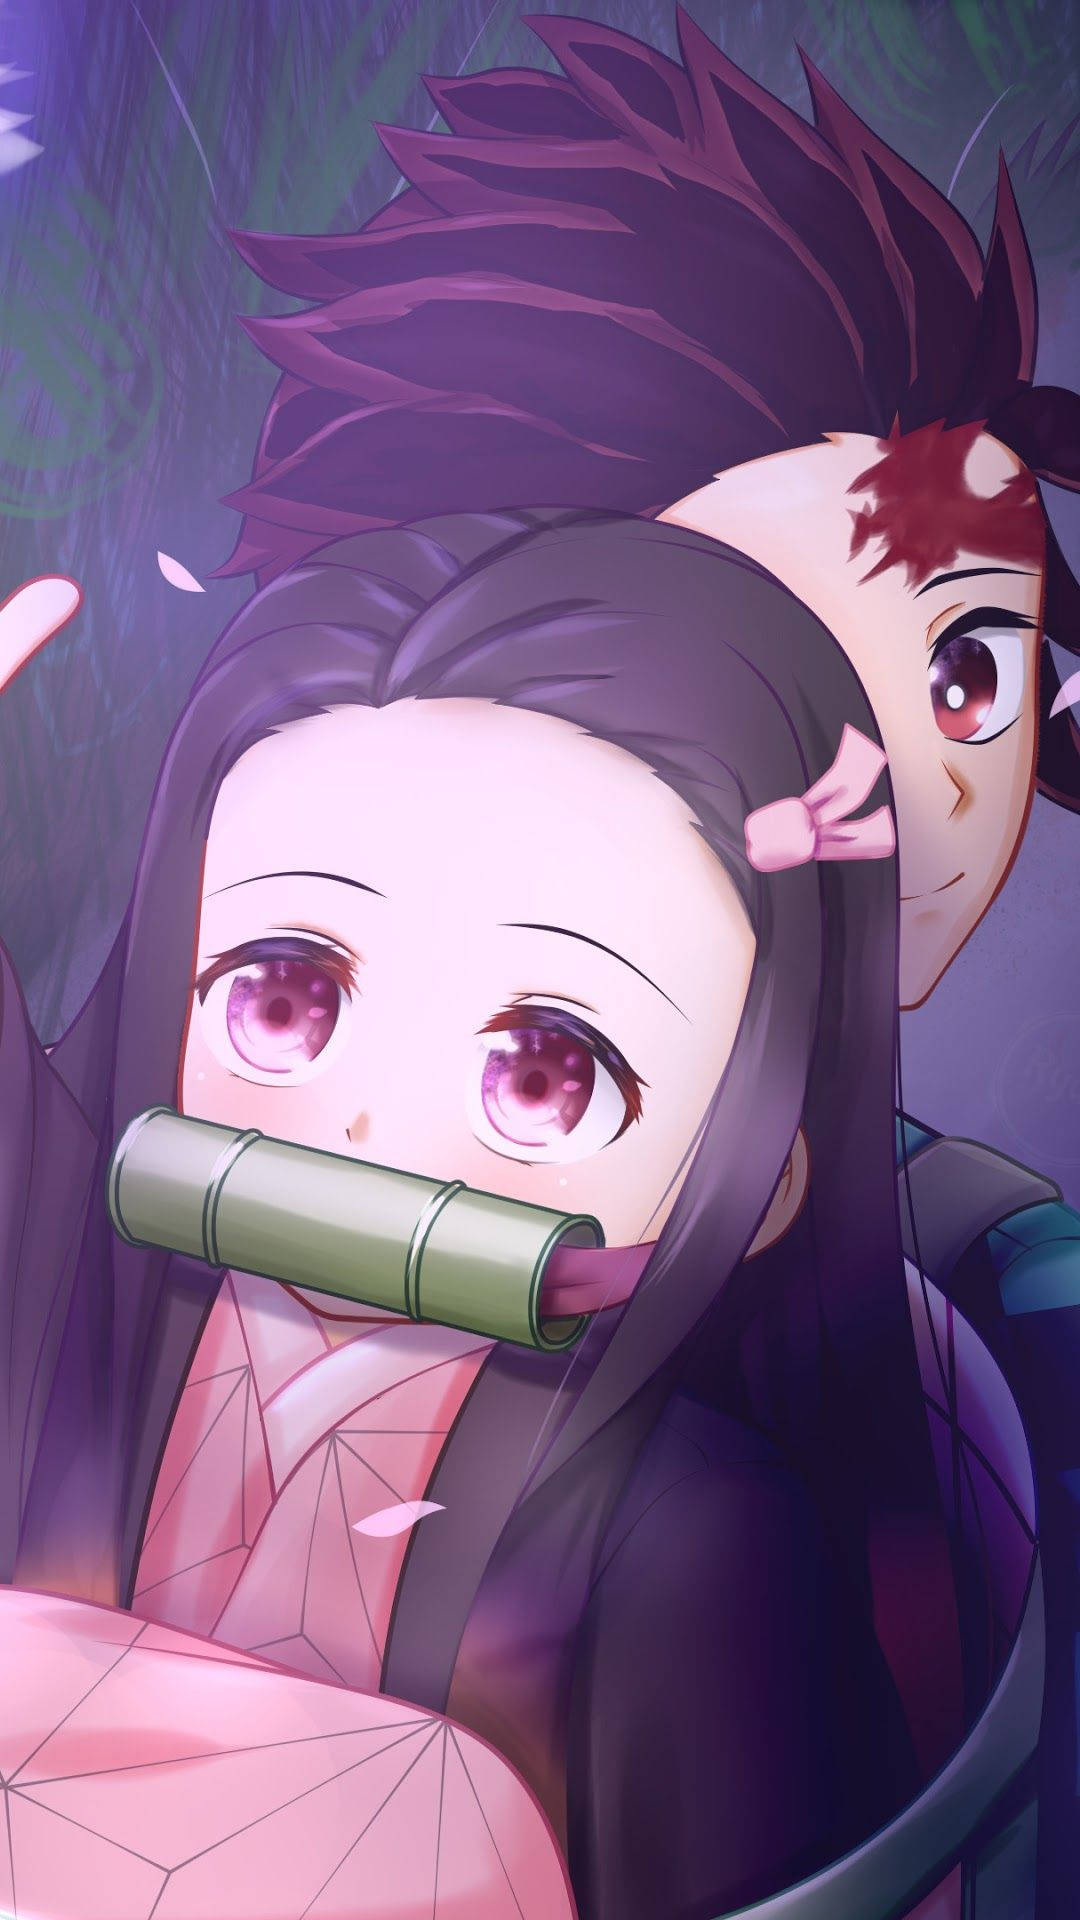 Enjoy your day with Nezuko's iPhone wallpaper Wallpaper